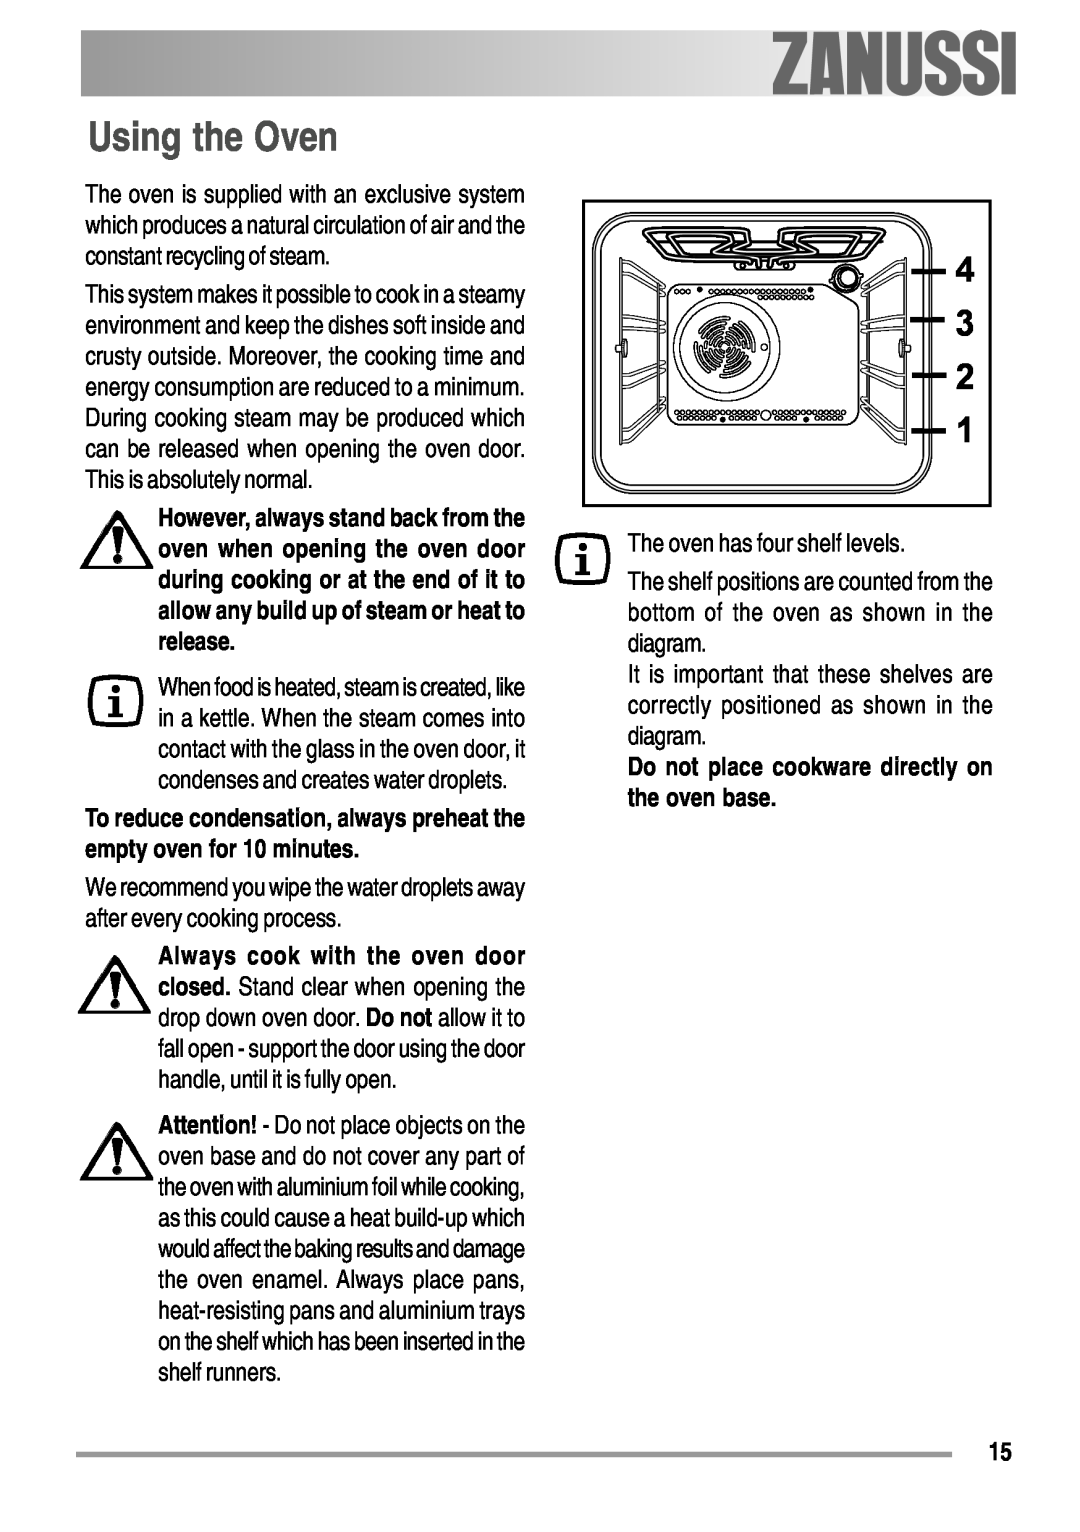 Zanussi ZOB 550 user manual Using the Oven, Do not place cookware directly on the oven base 